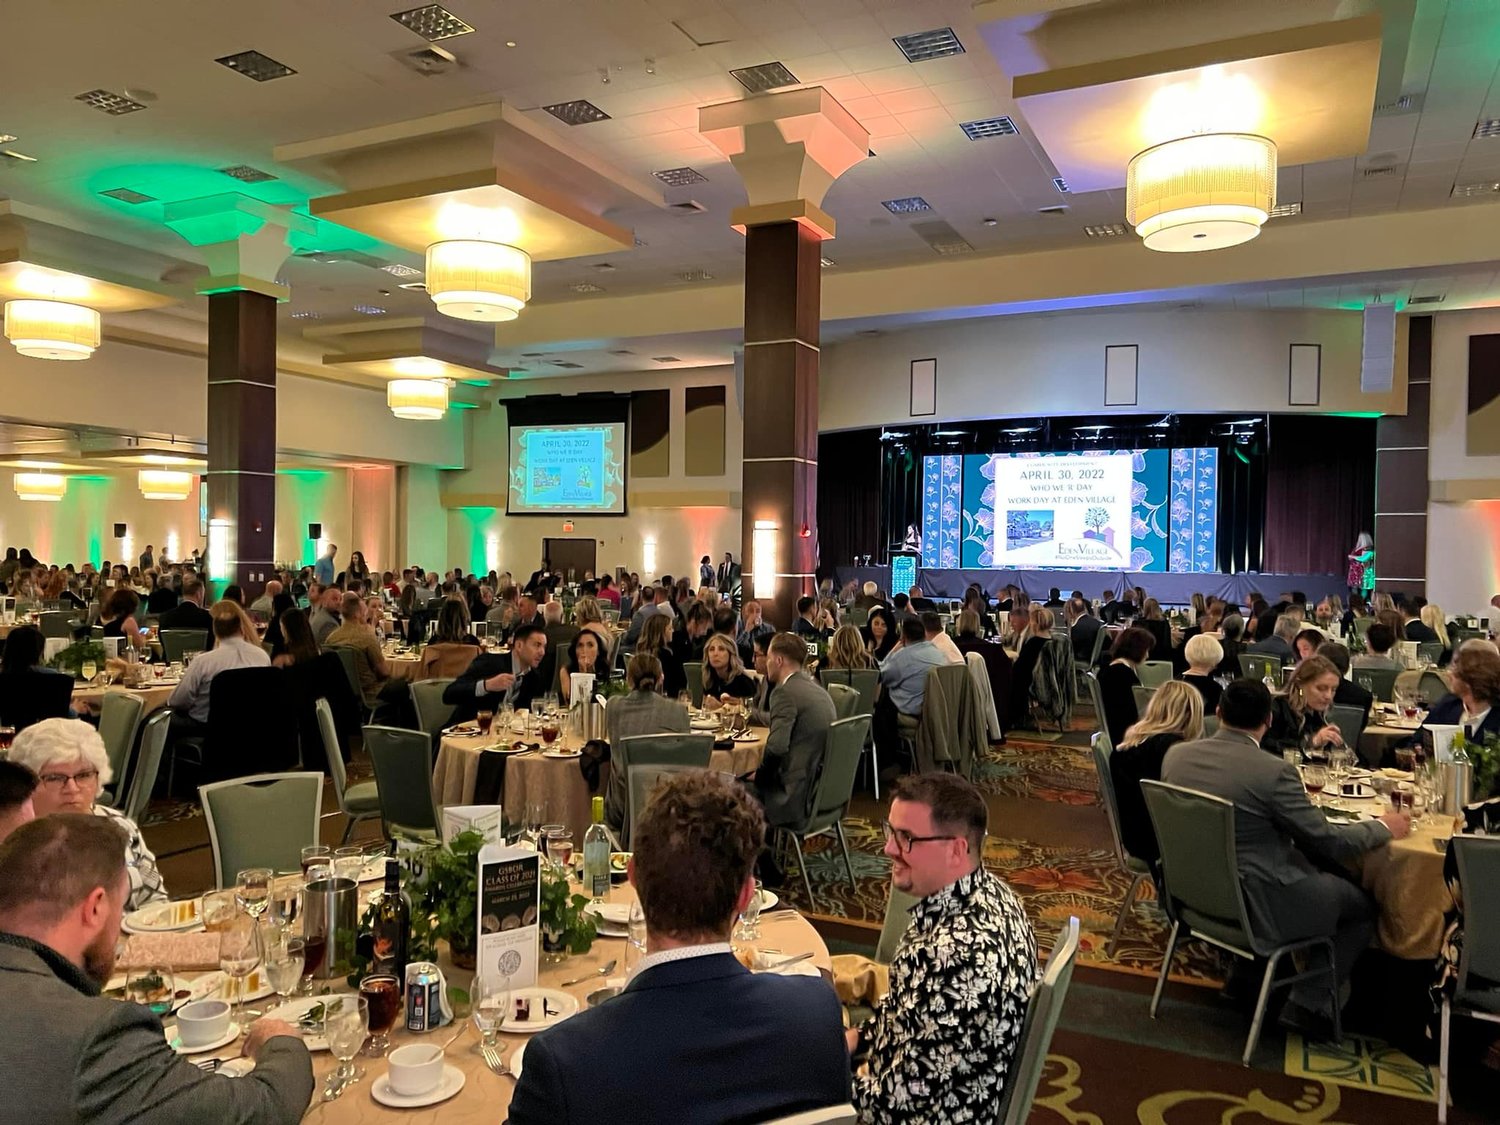 More than 800 people are in attendance at GSBOR's annual awards ceremony at Oasis Hotel and Convention Center on March 25.